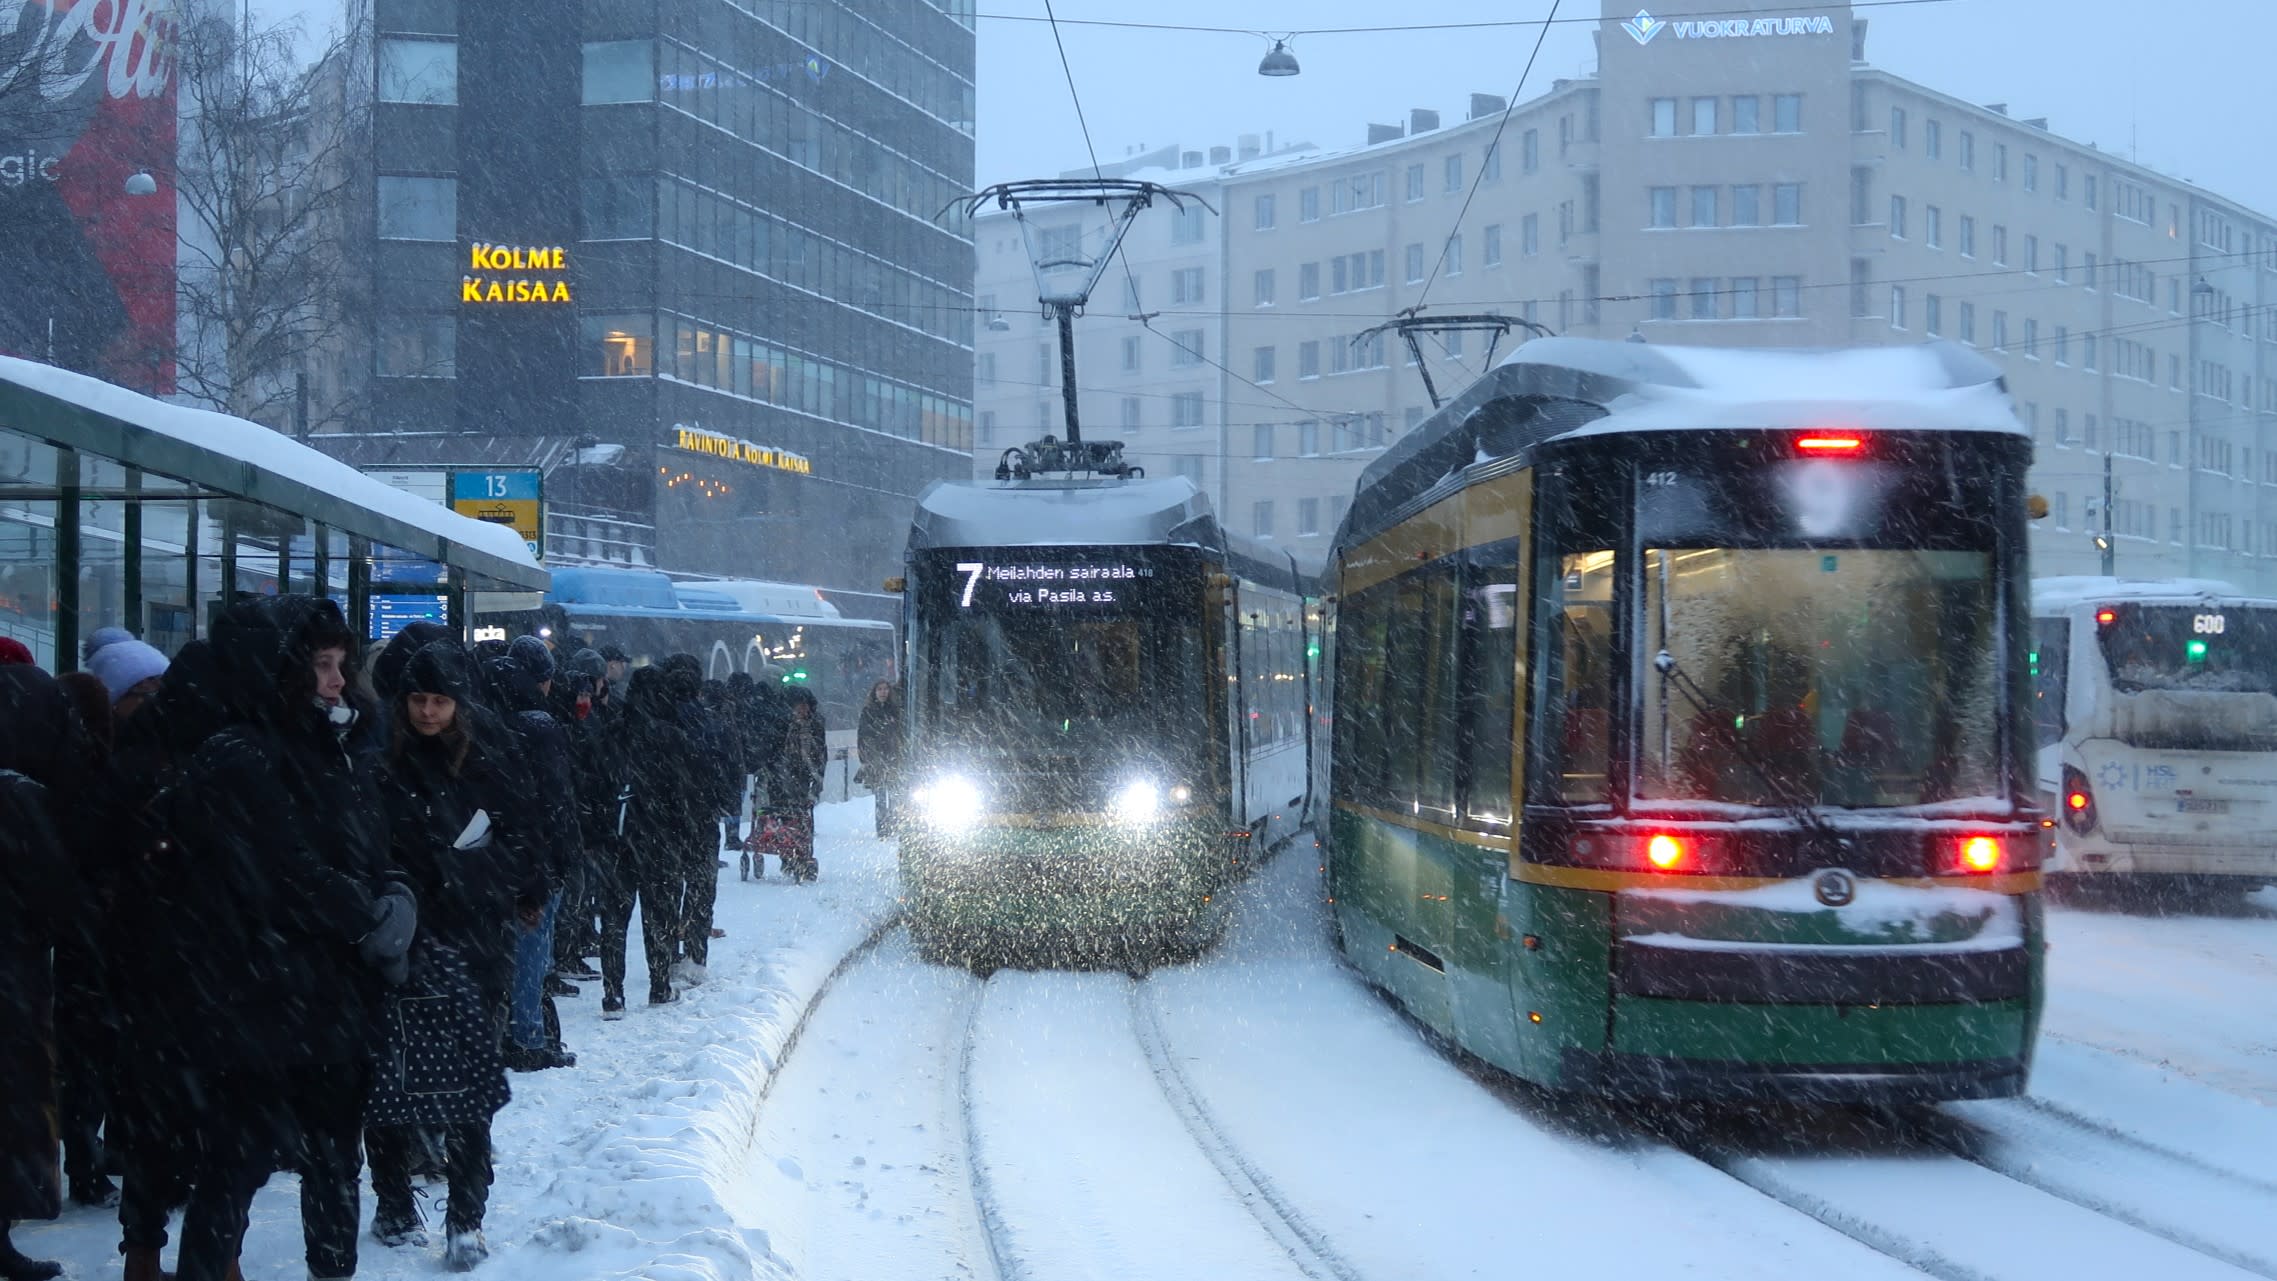 Snowstorm blows up traffic, causes delays in Finland